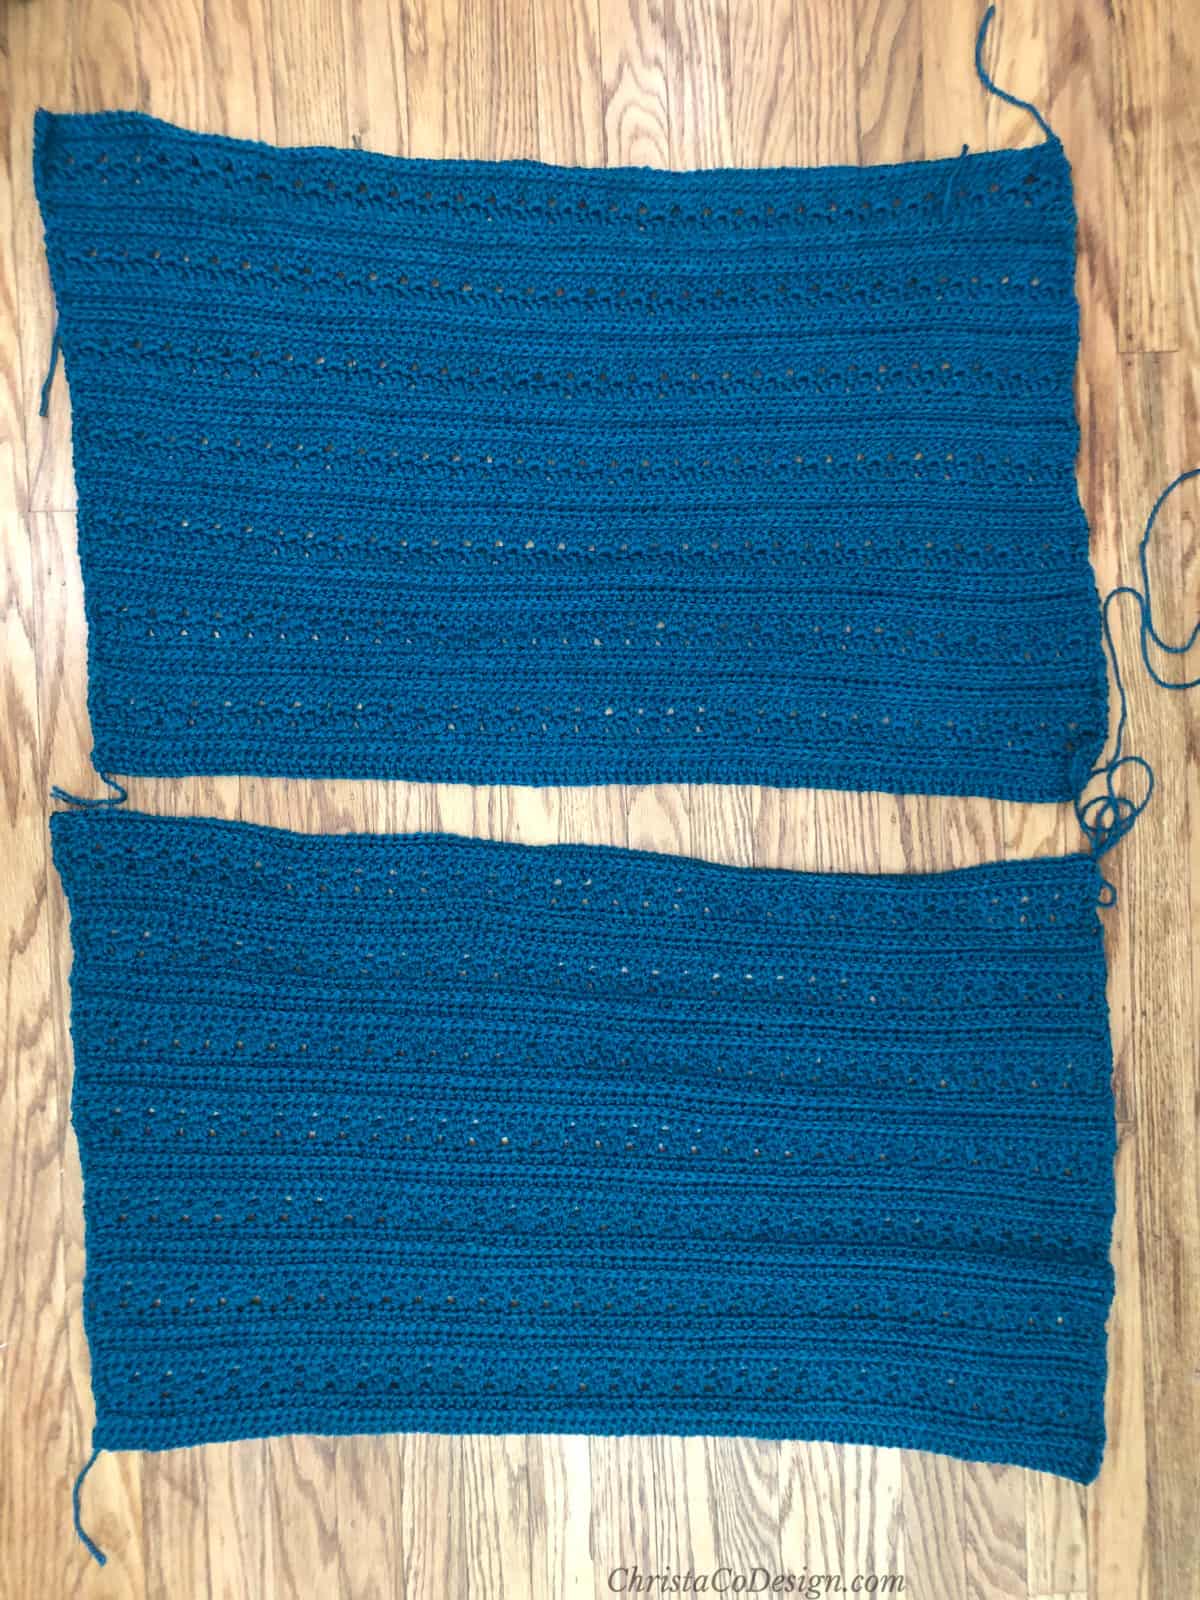 Two blue textured crochet rectangles laid on wood floor ready to be seamed into poncho.